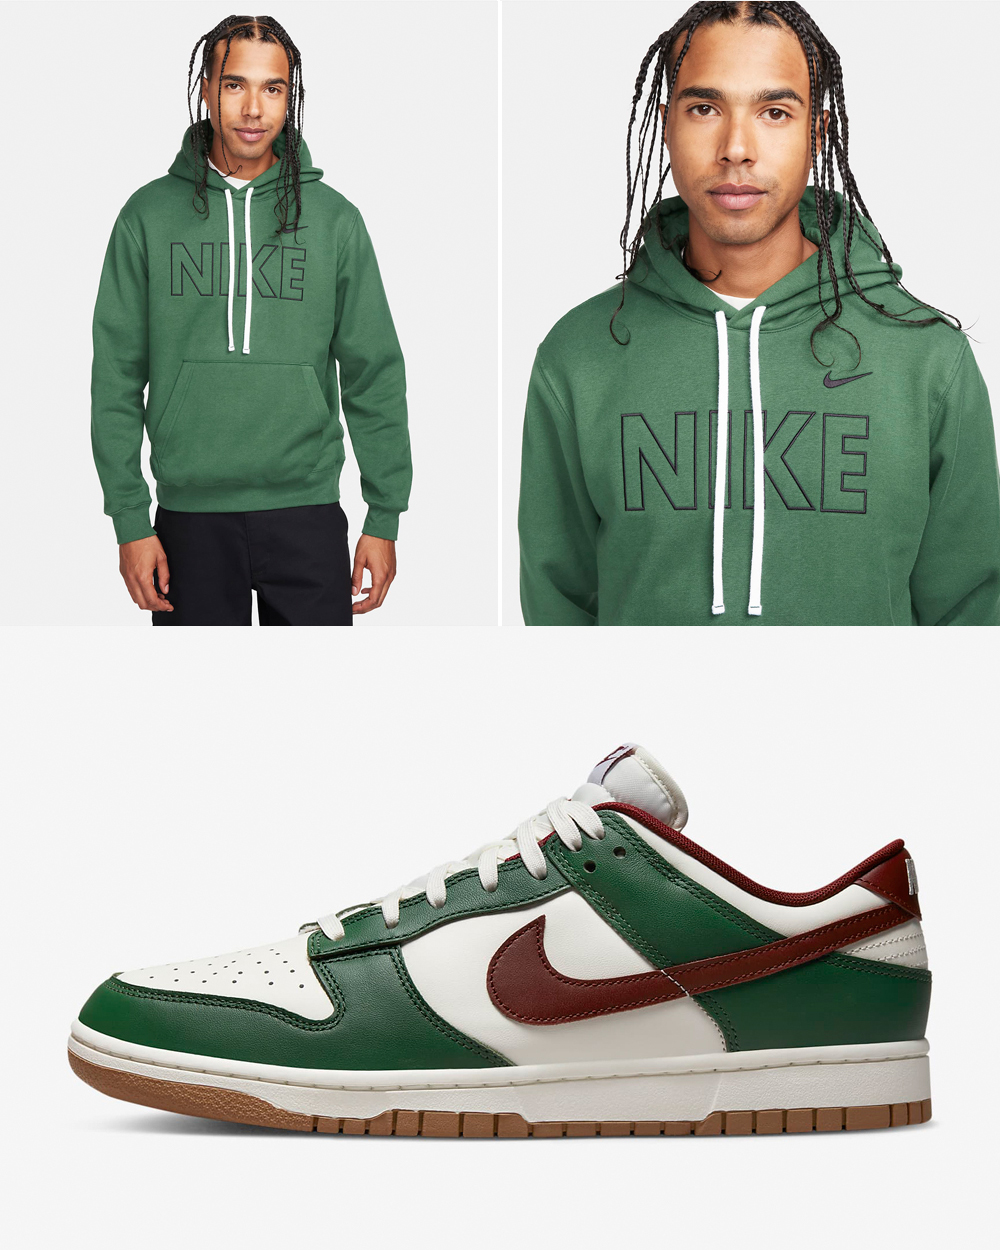 nike Tan Dunk Low Gorge Green Hoodie Outfit 2